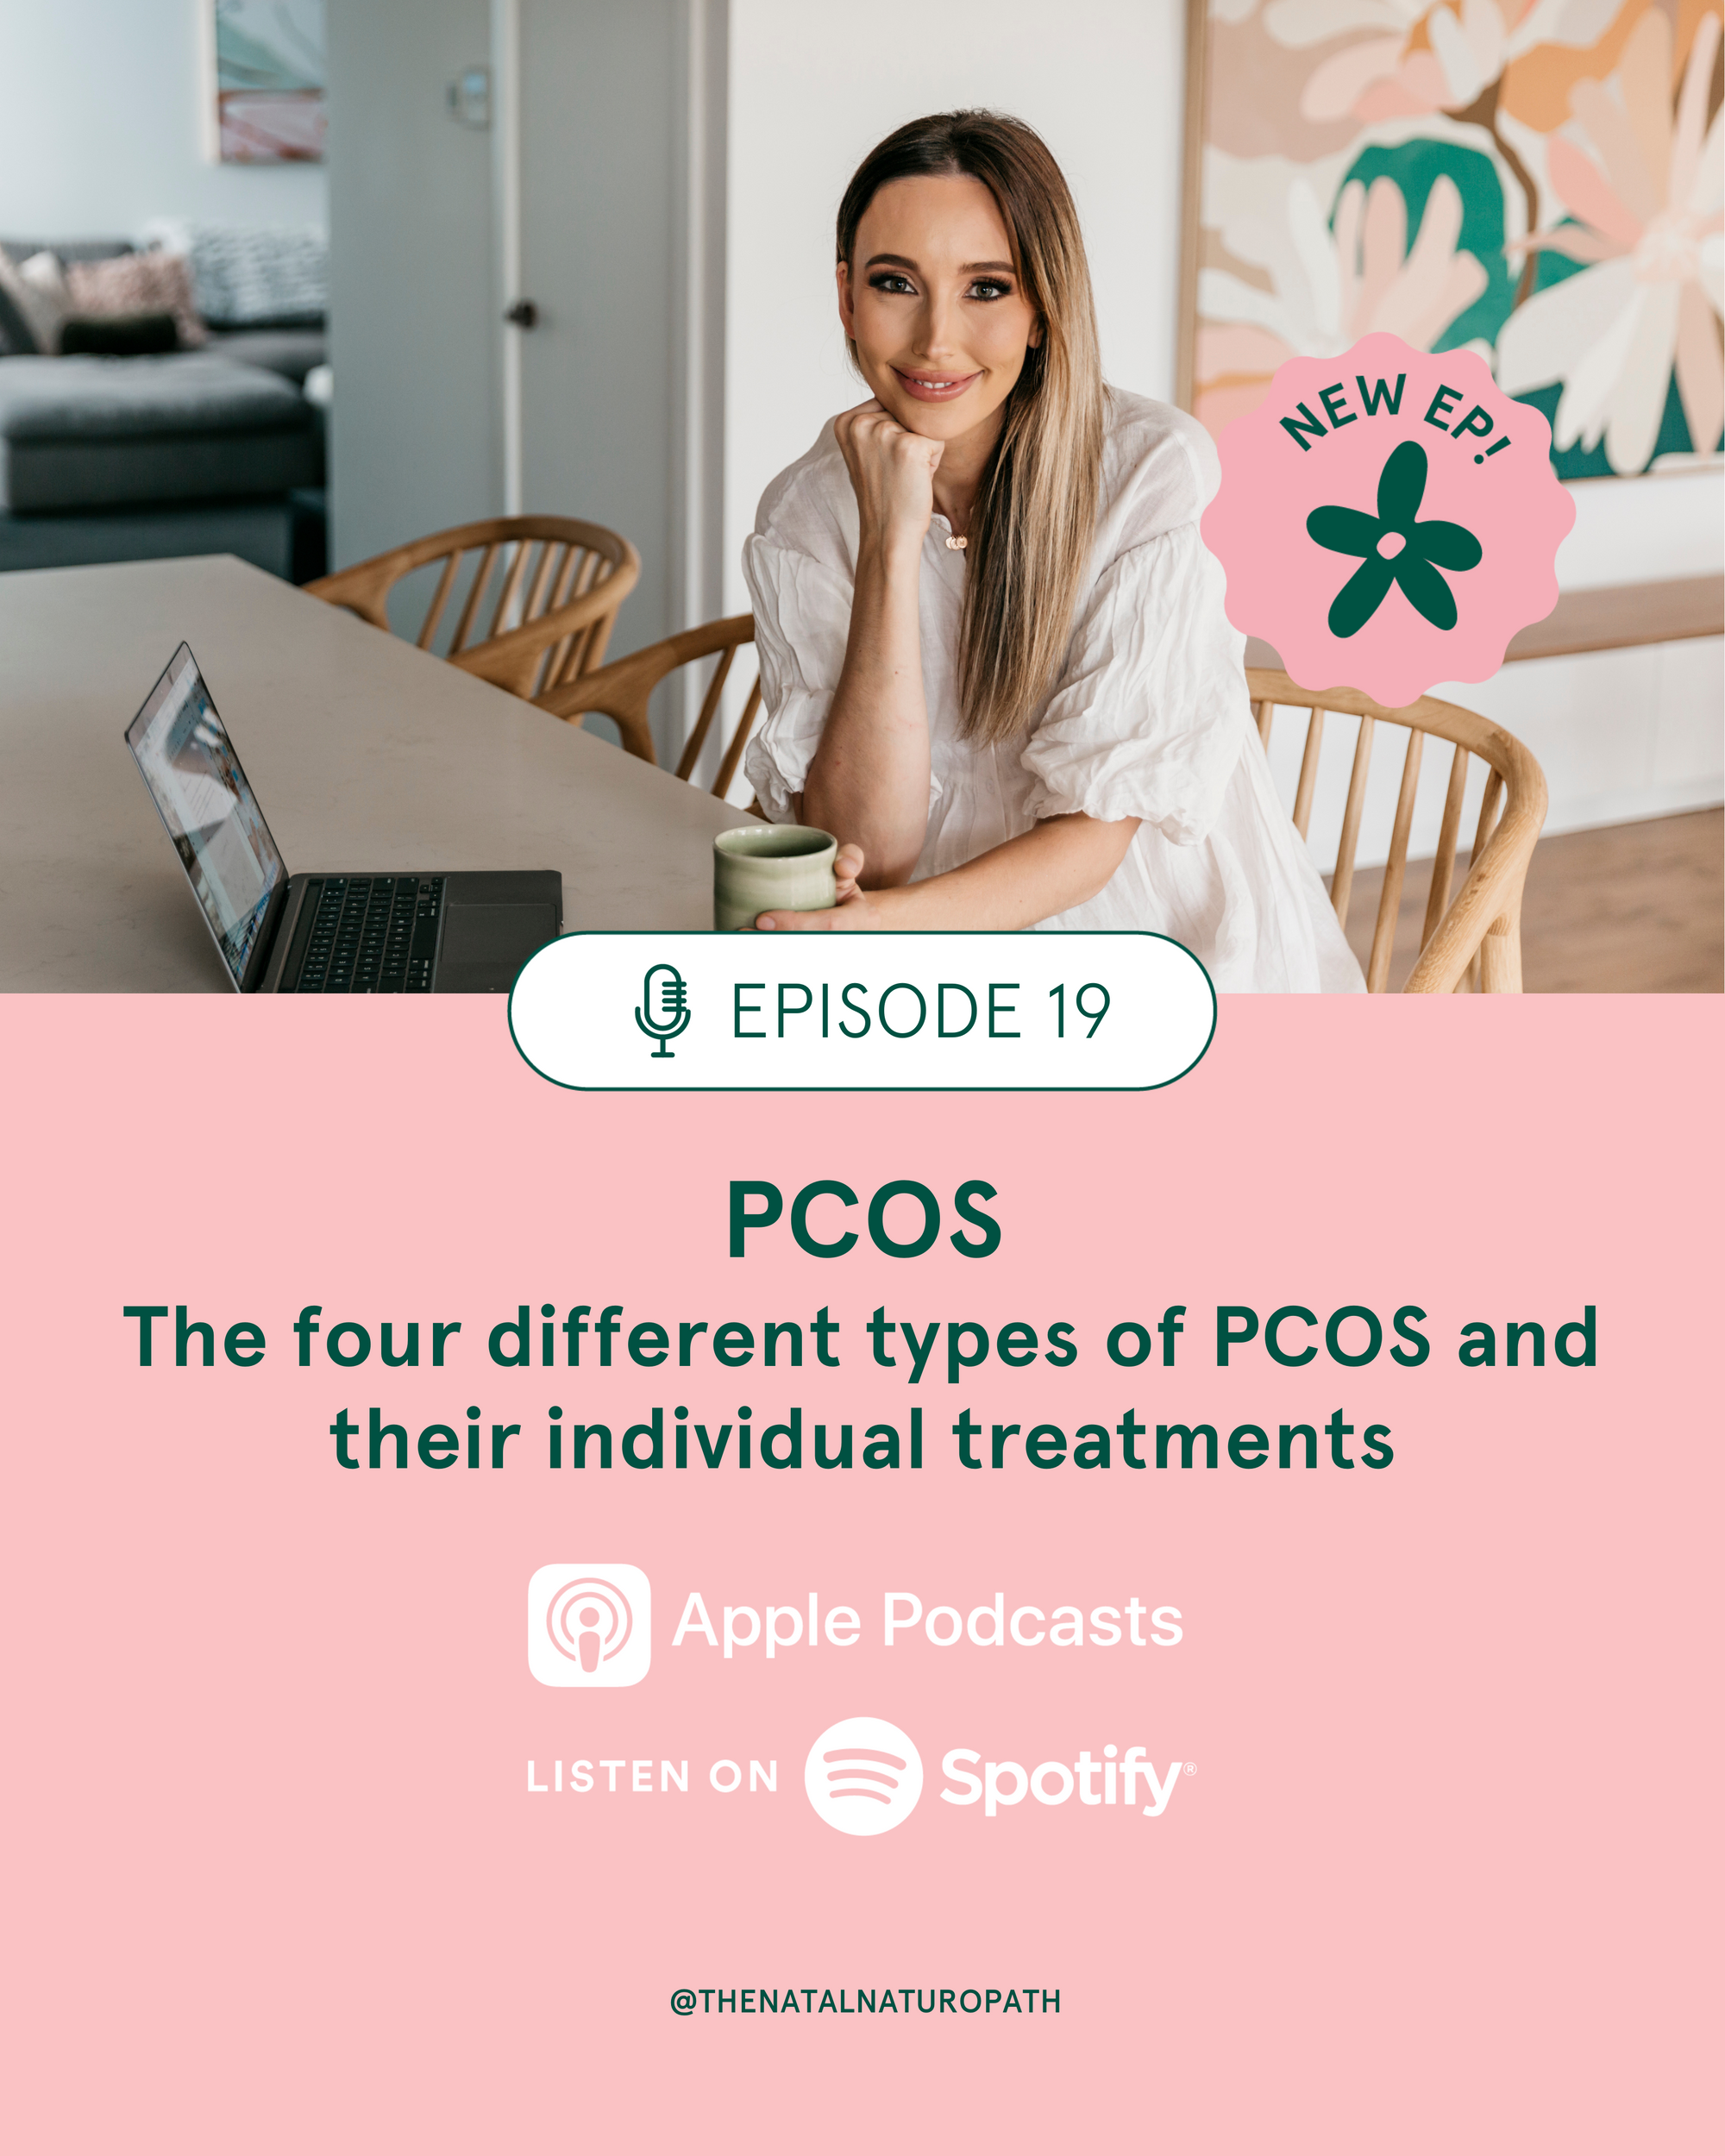 PCOS: The four different types of PCOS and their individual treatments